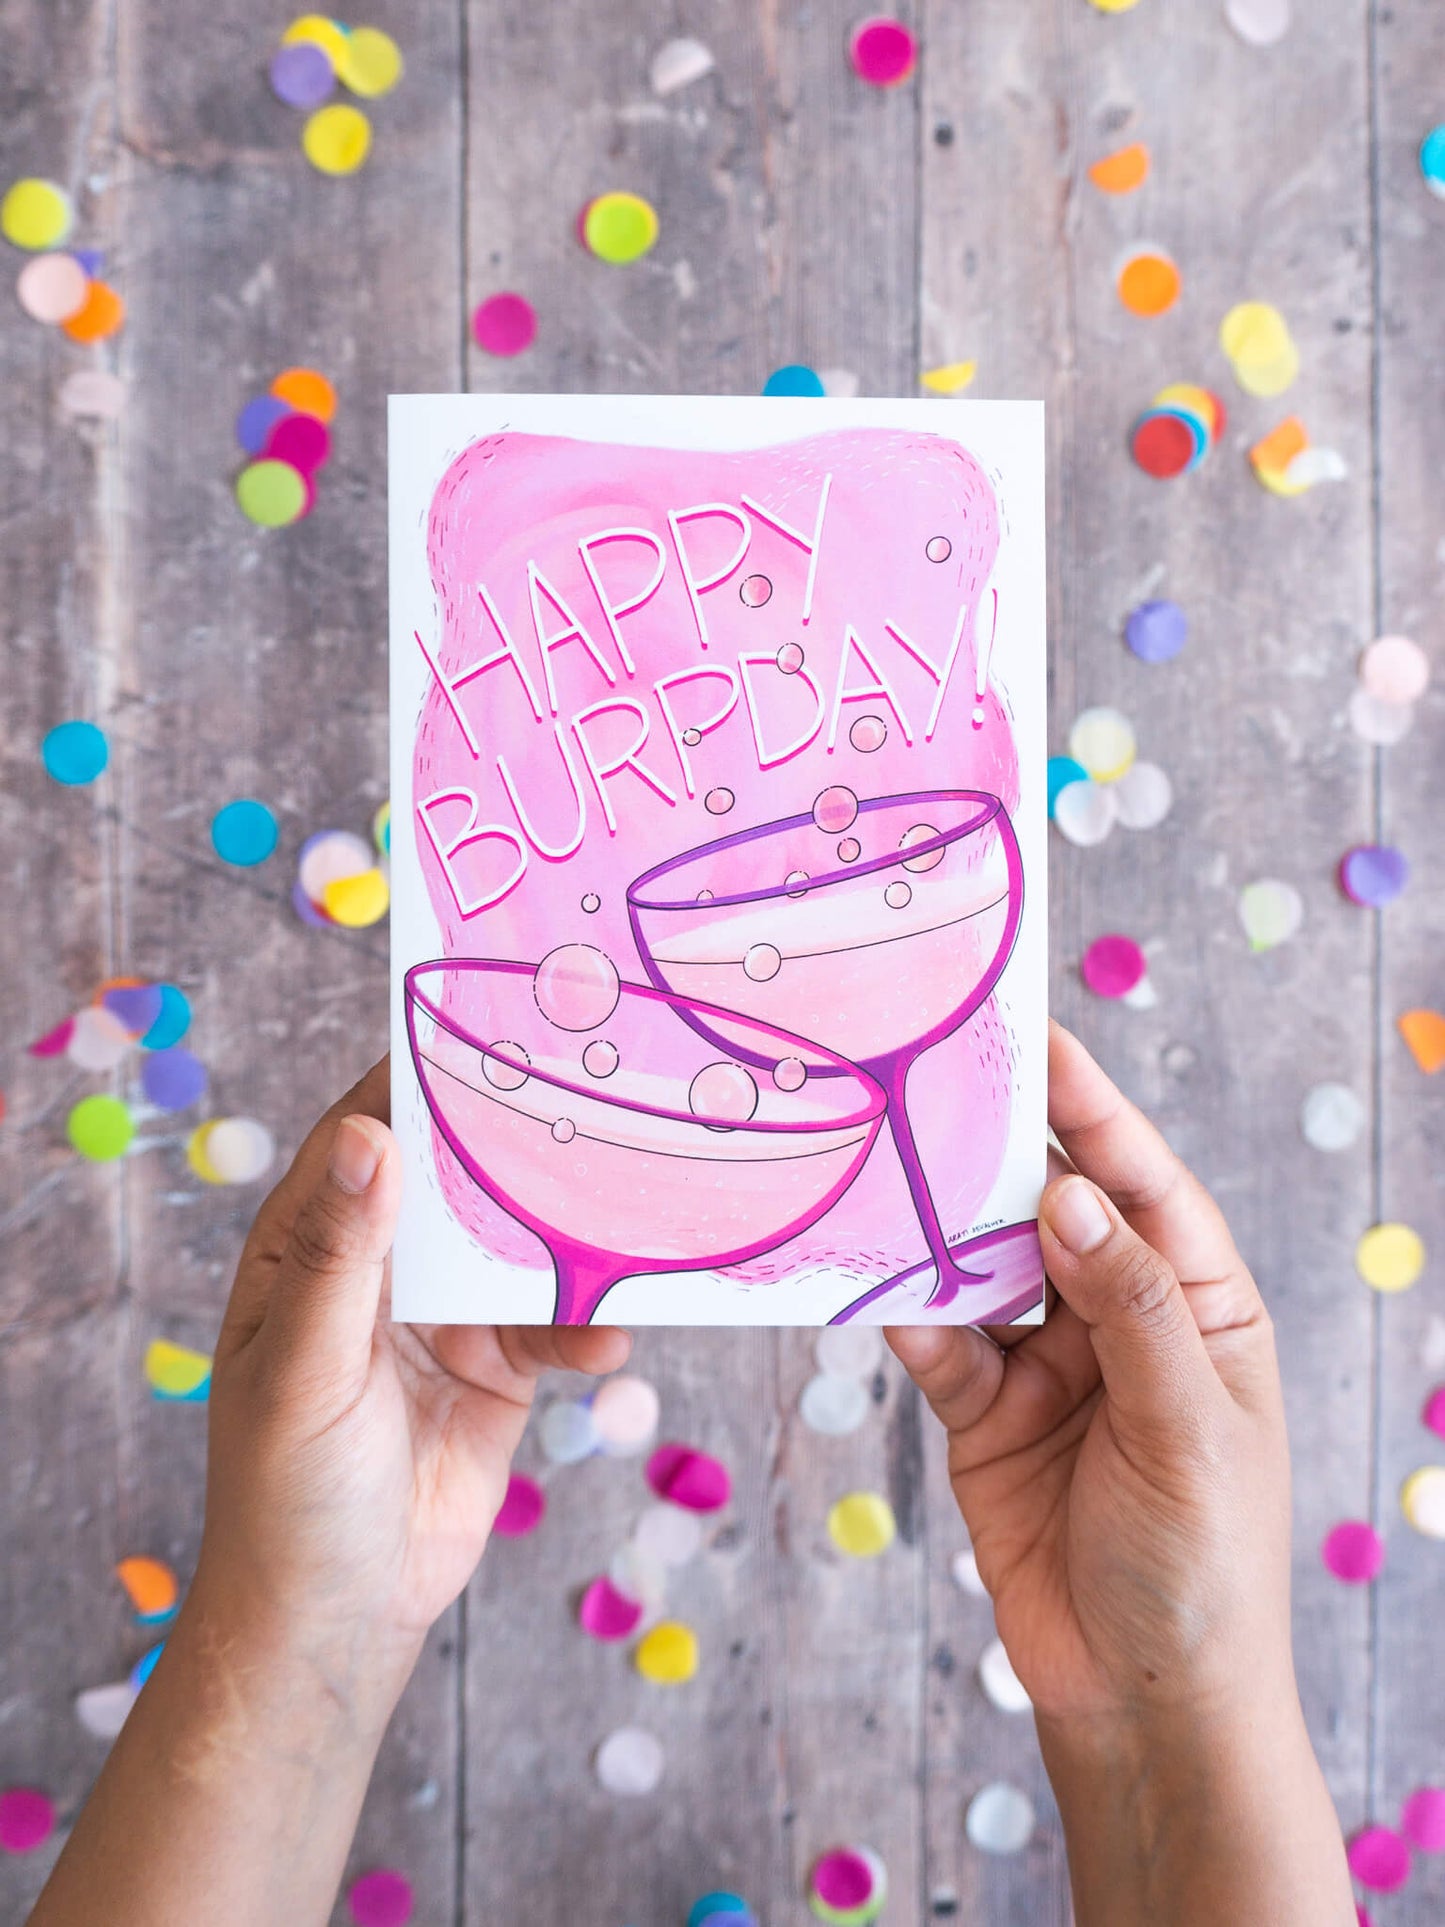 Happy Burpday Bubbly – (end of line) birthday greeting card